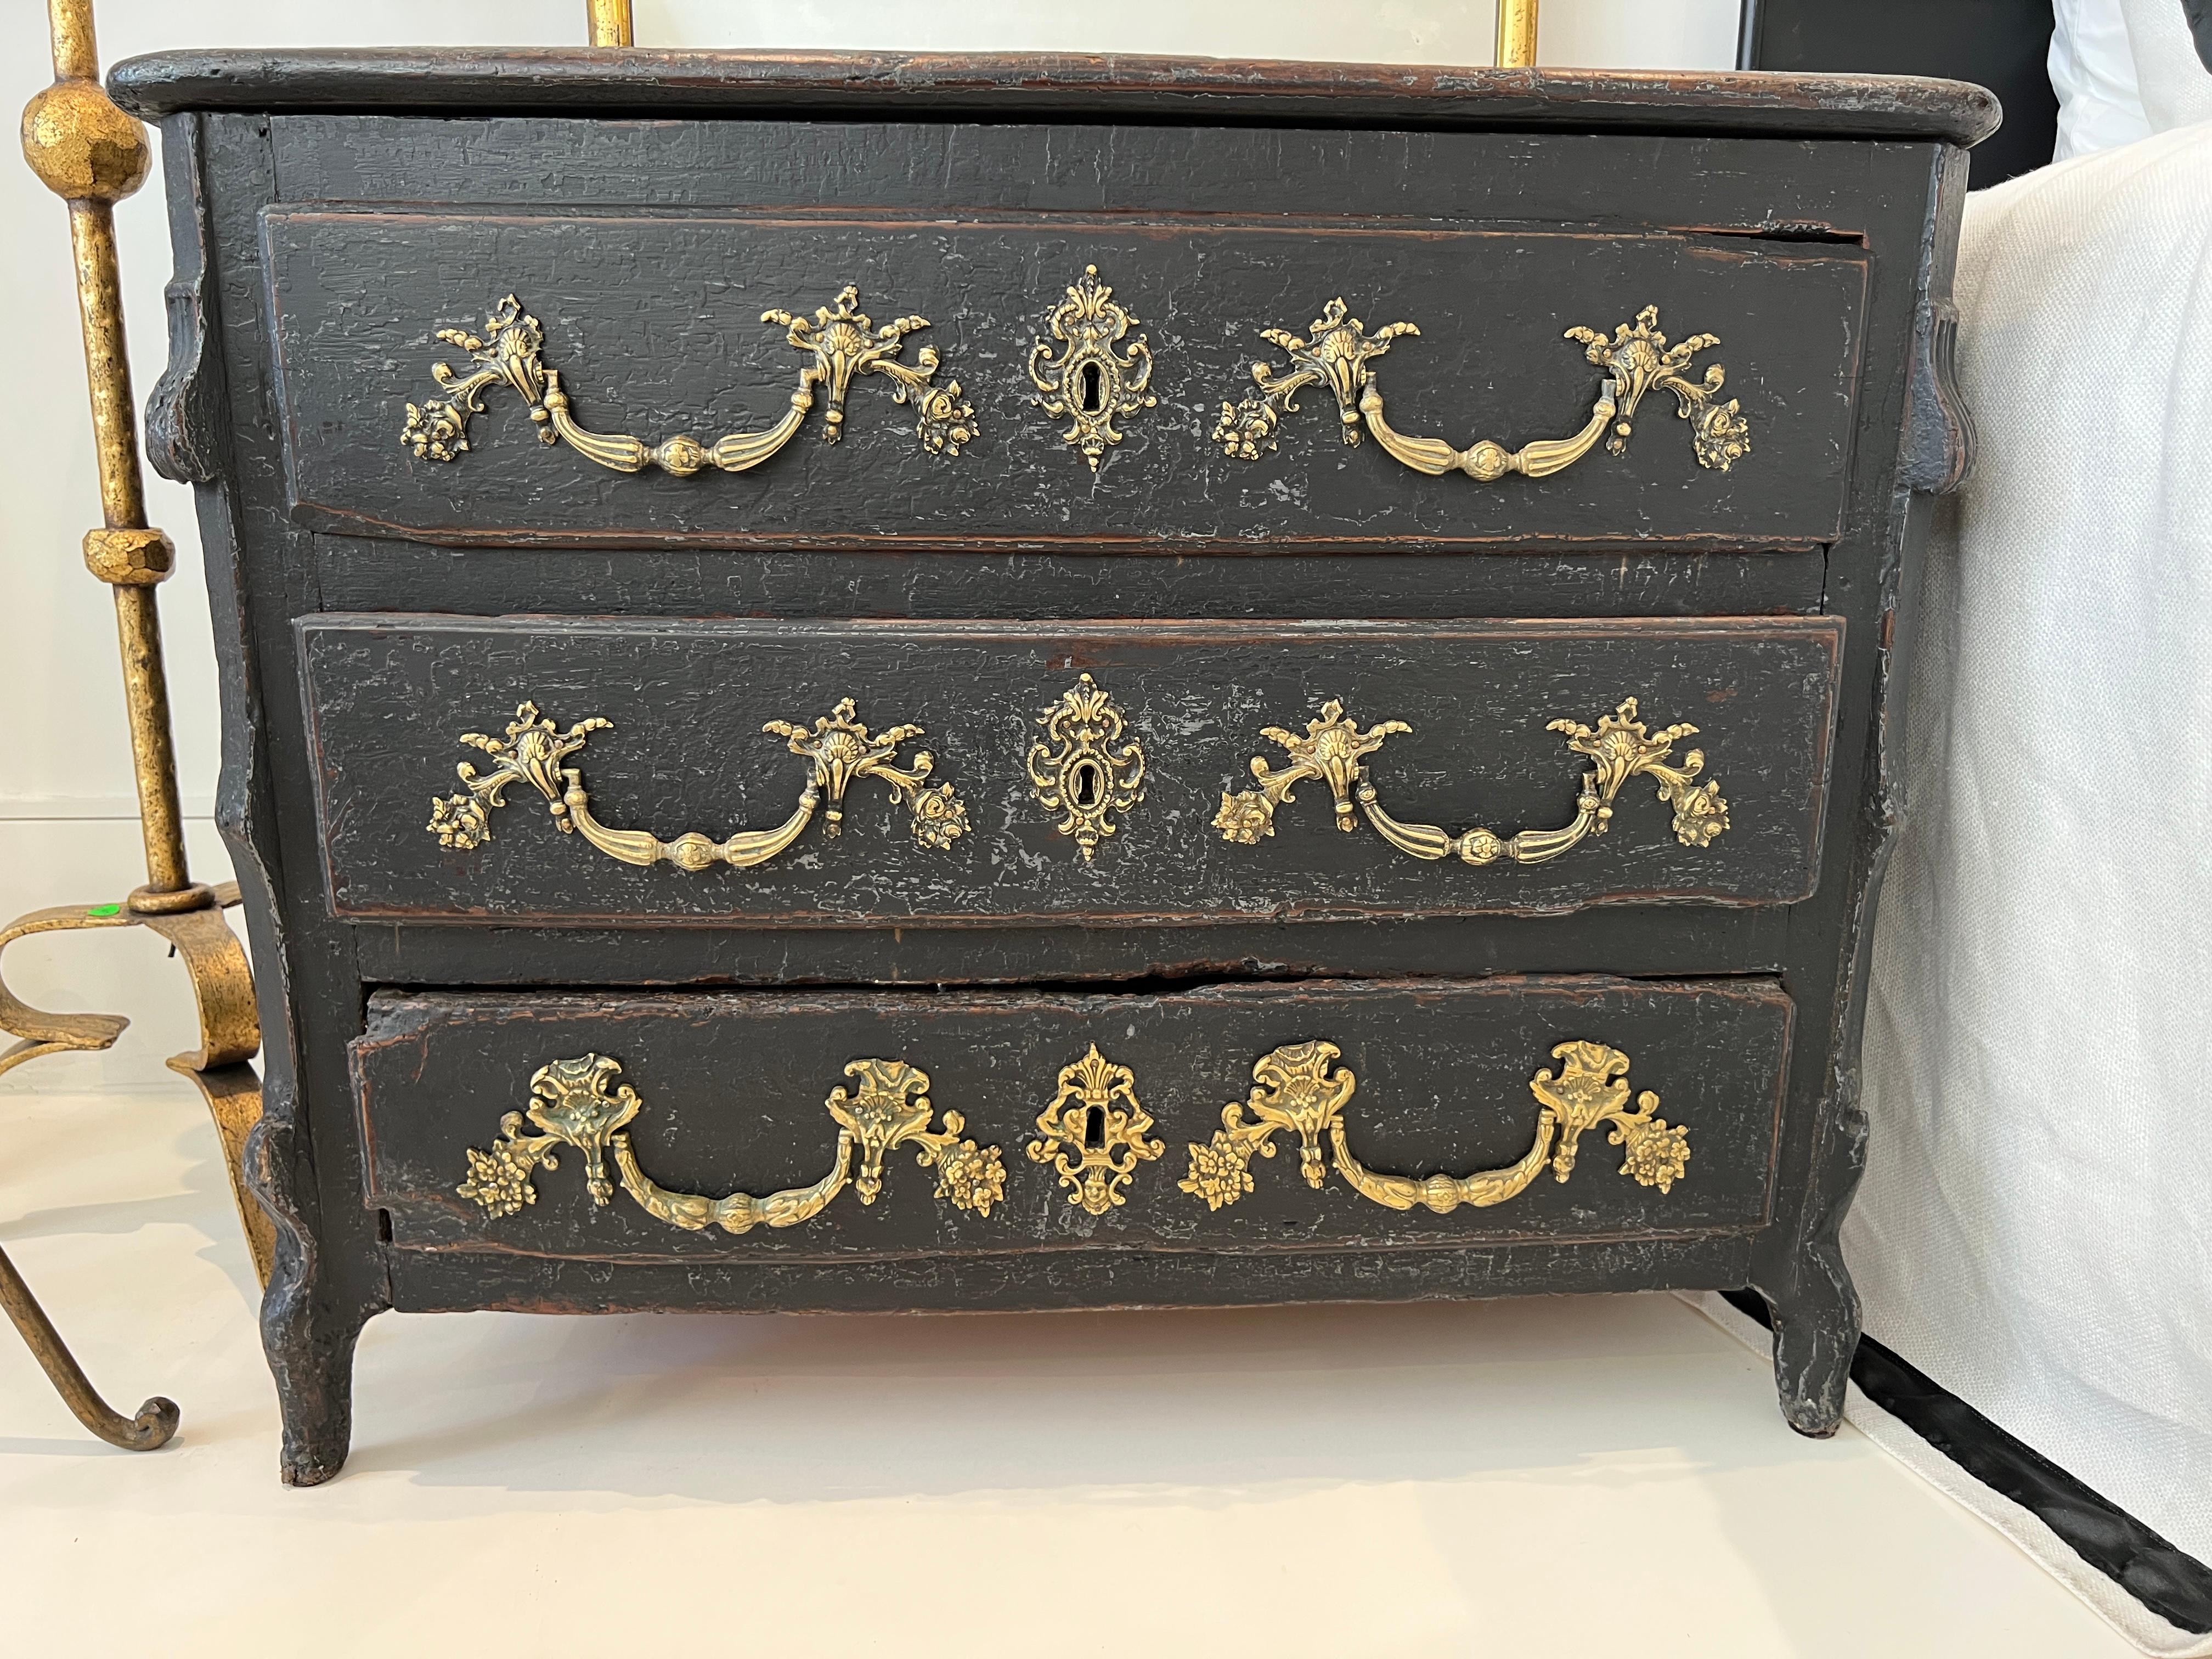 Very desirable black chest or commode with stunning bronze pulls. A strong statement piece in any decor.